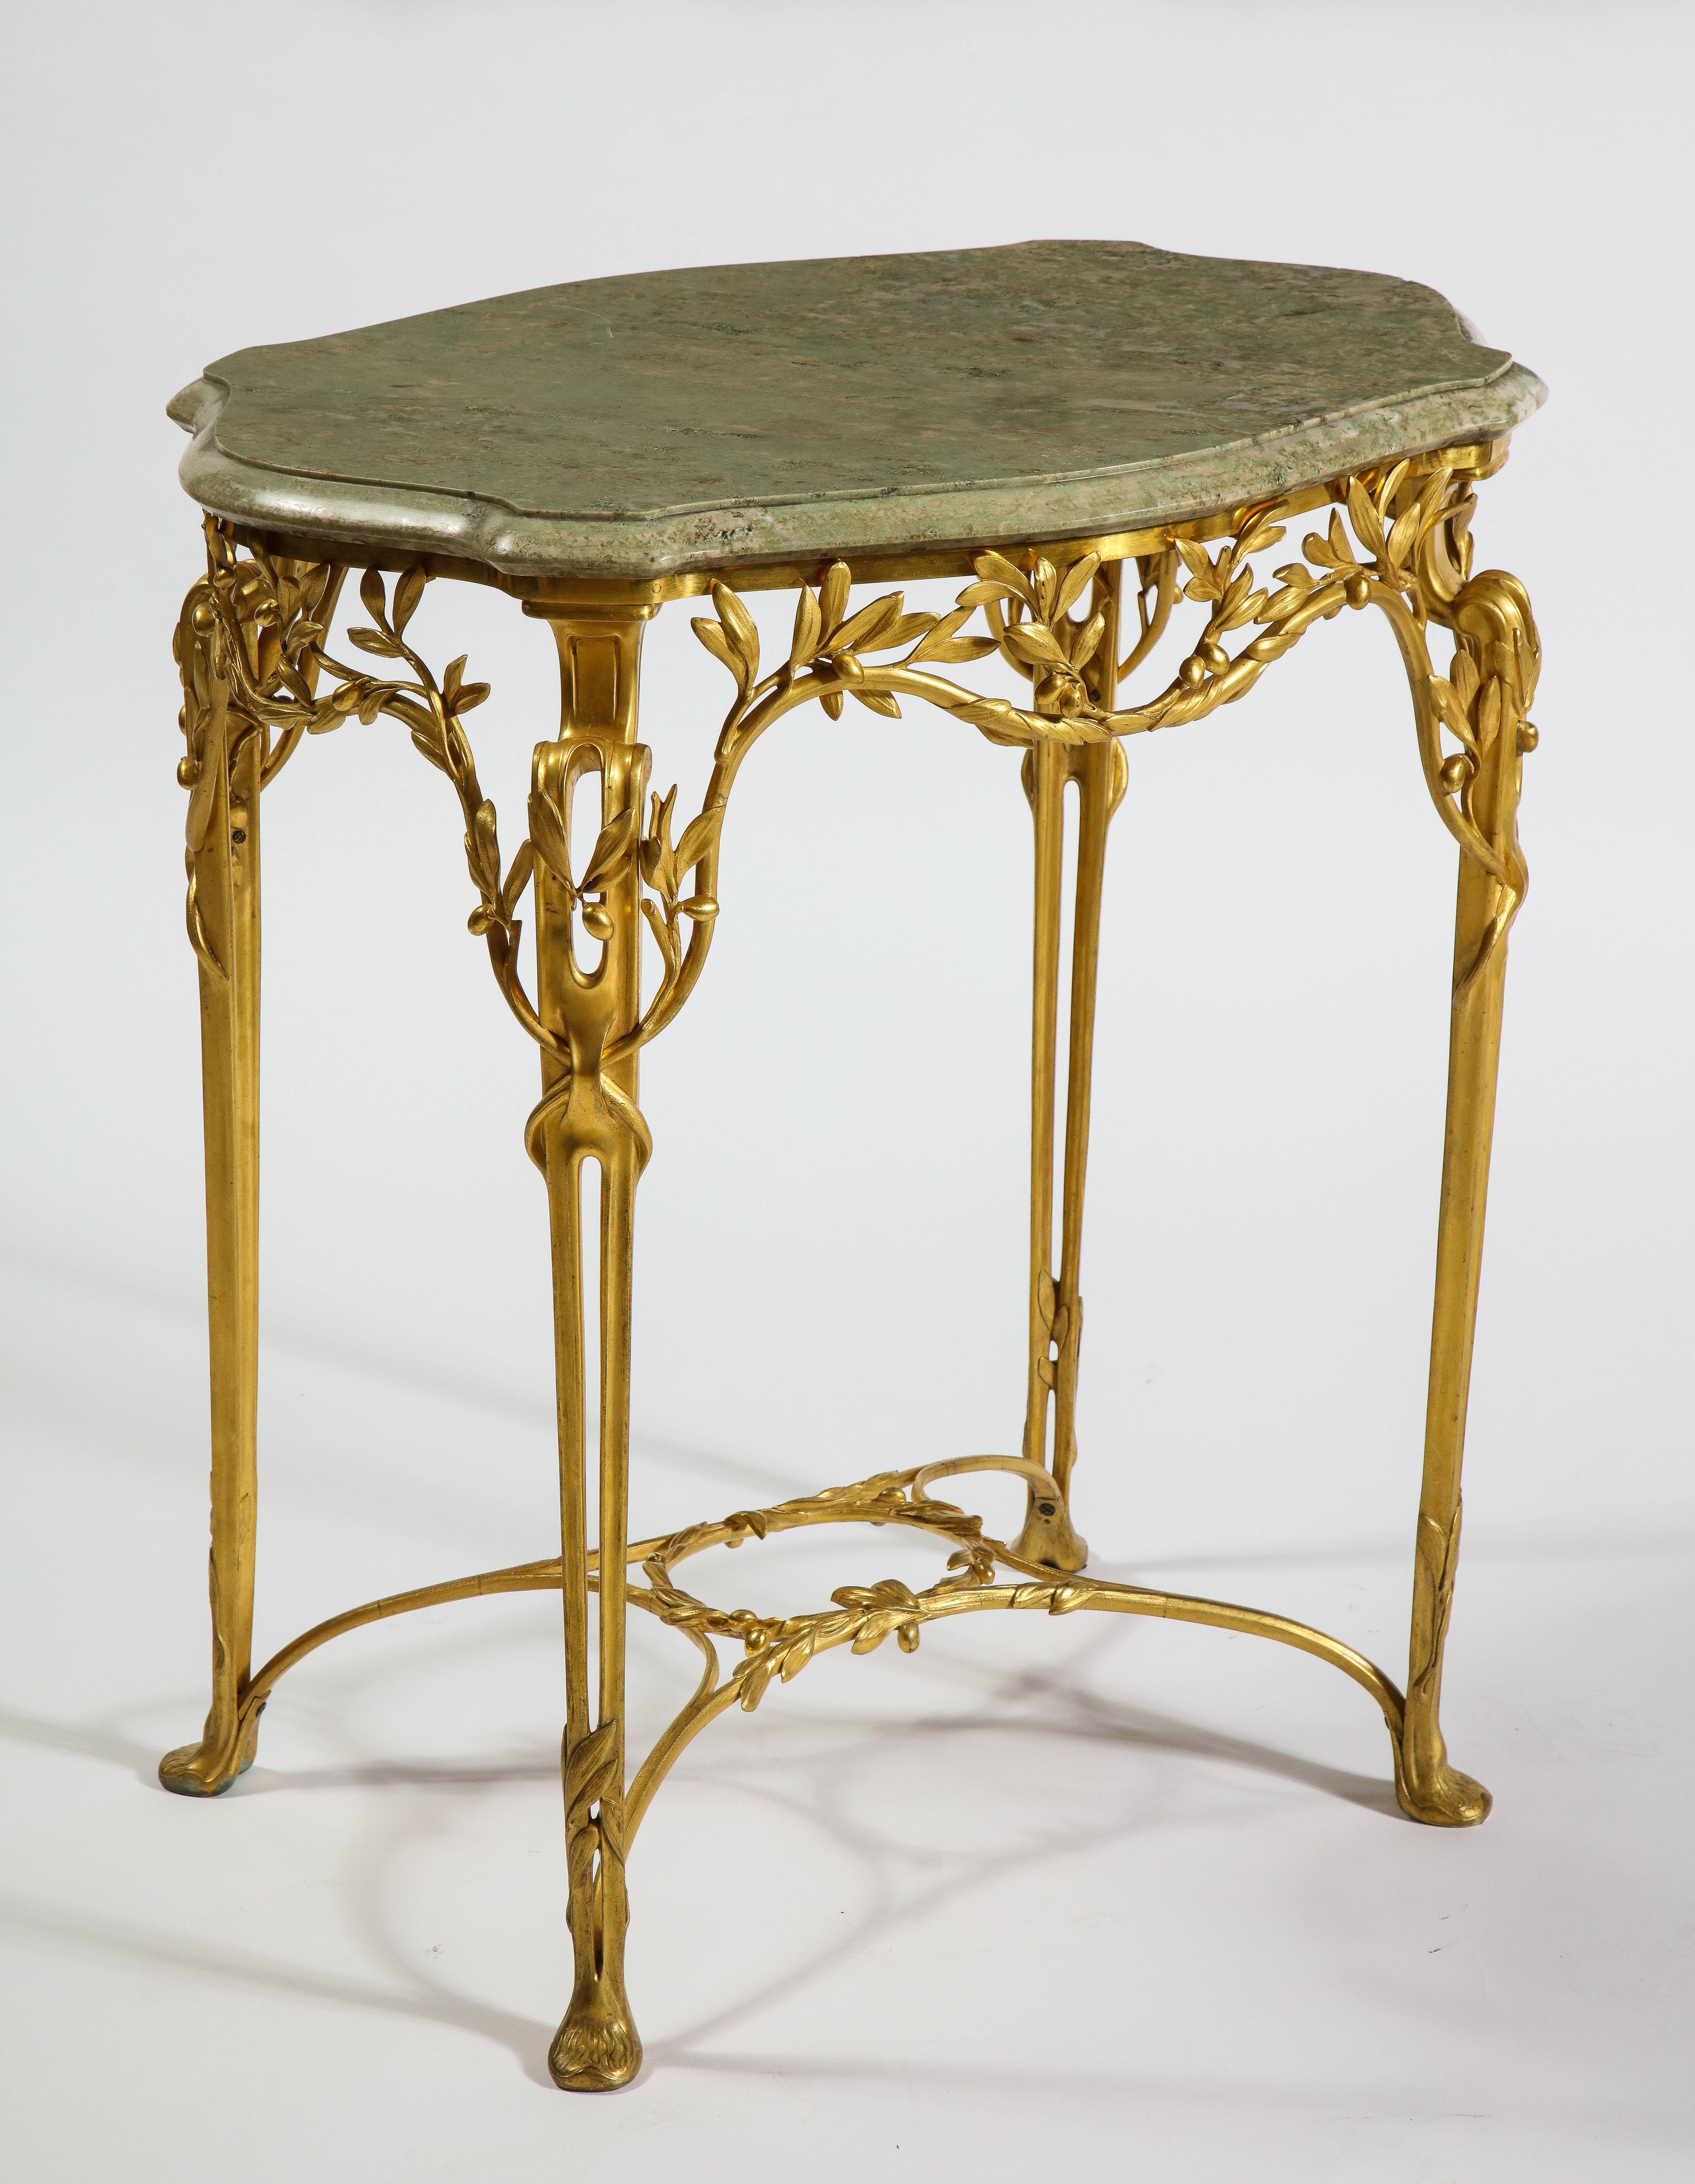 American Center Table by Tiffany and Co., Dore Bronze and Marble Top, Signed, Early 1900s For Sale